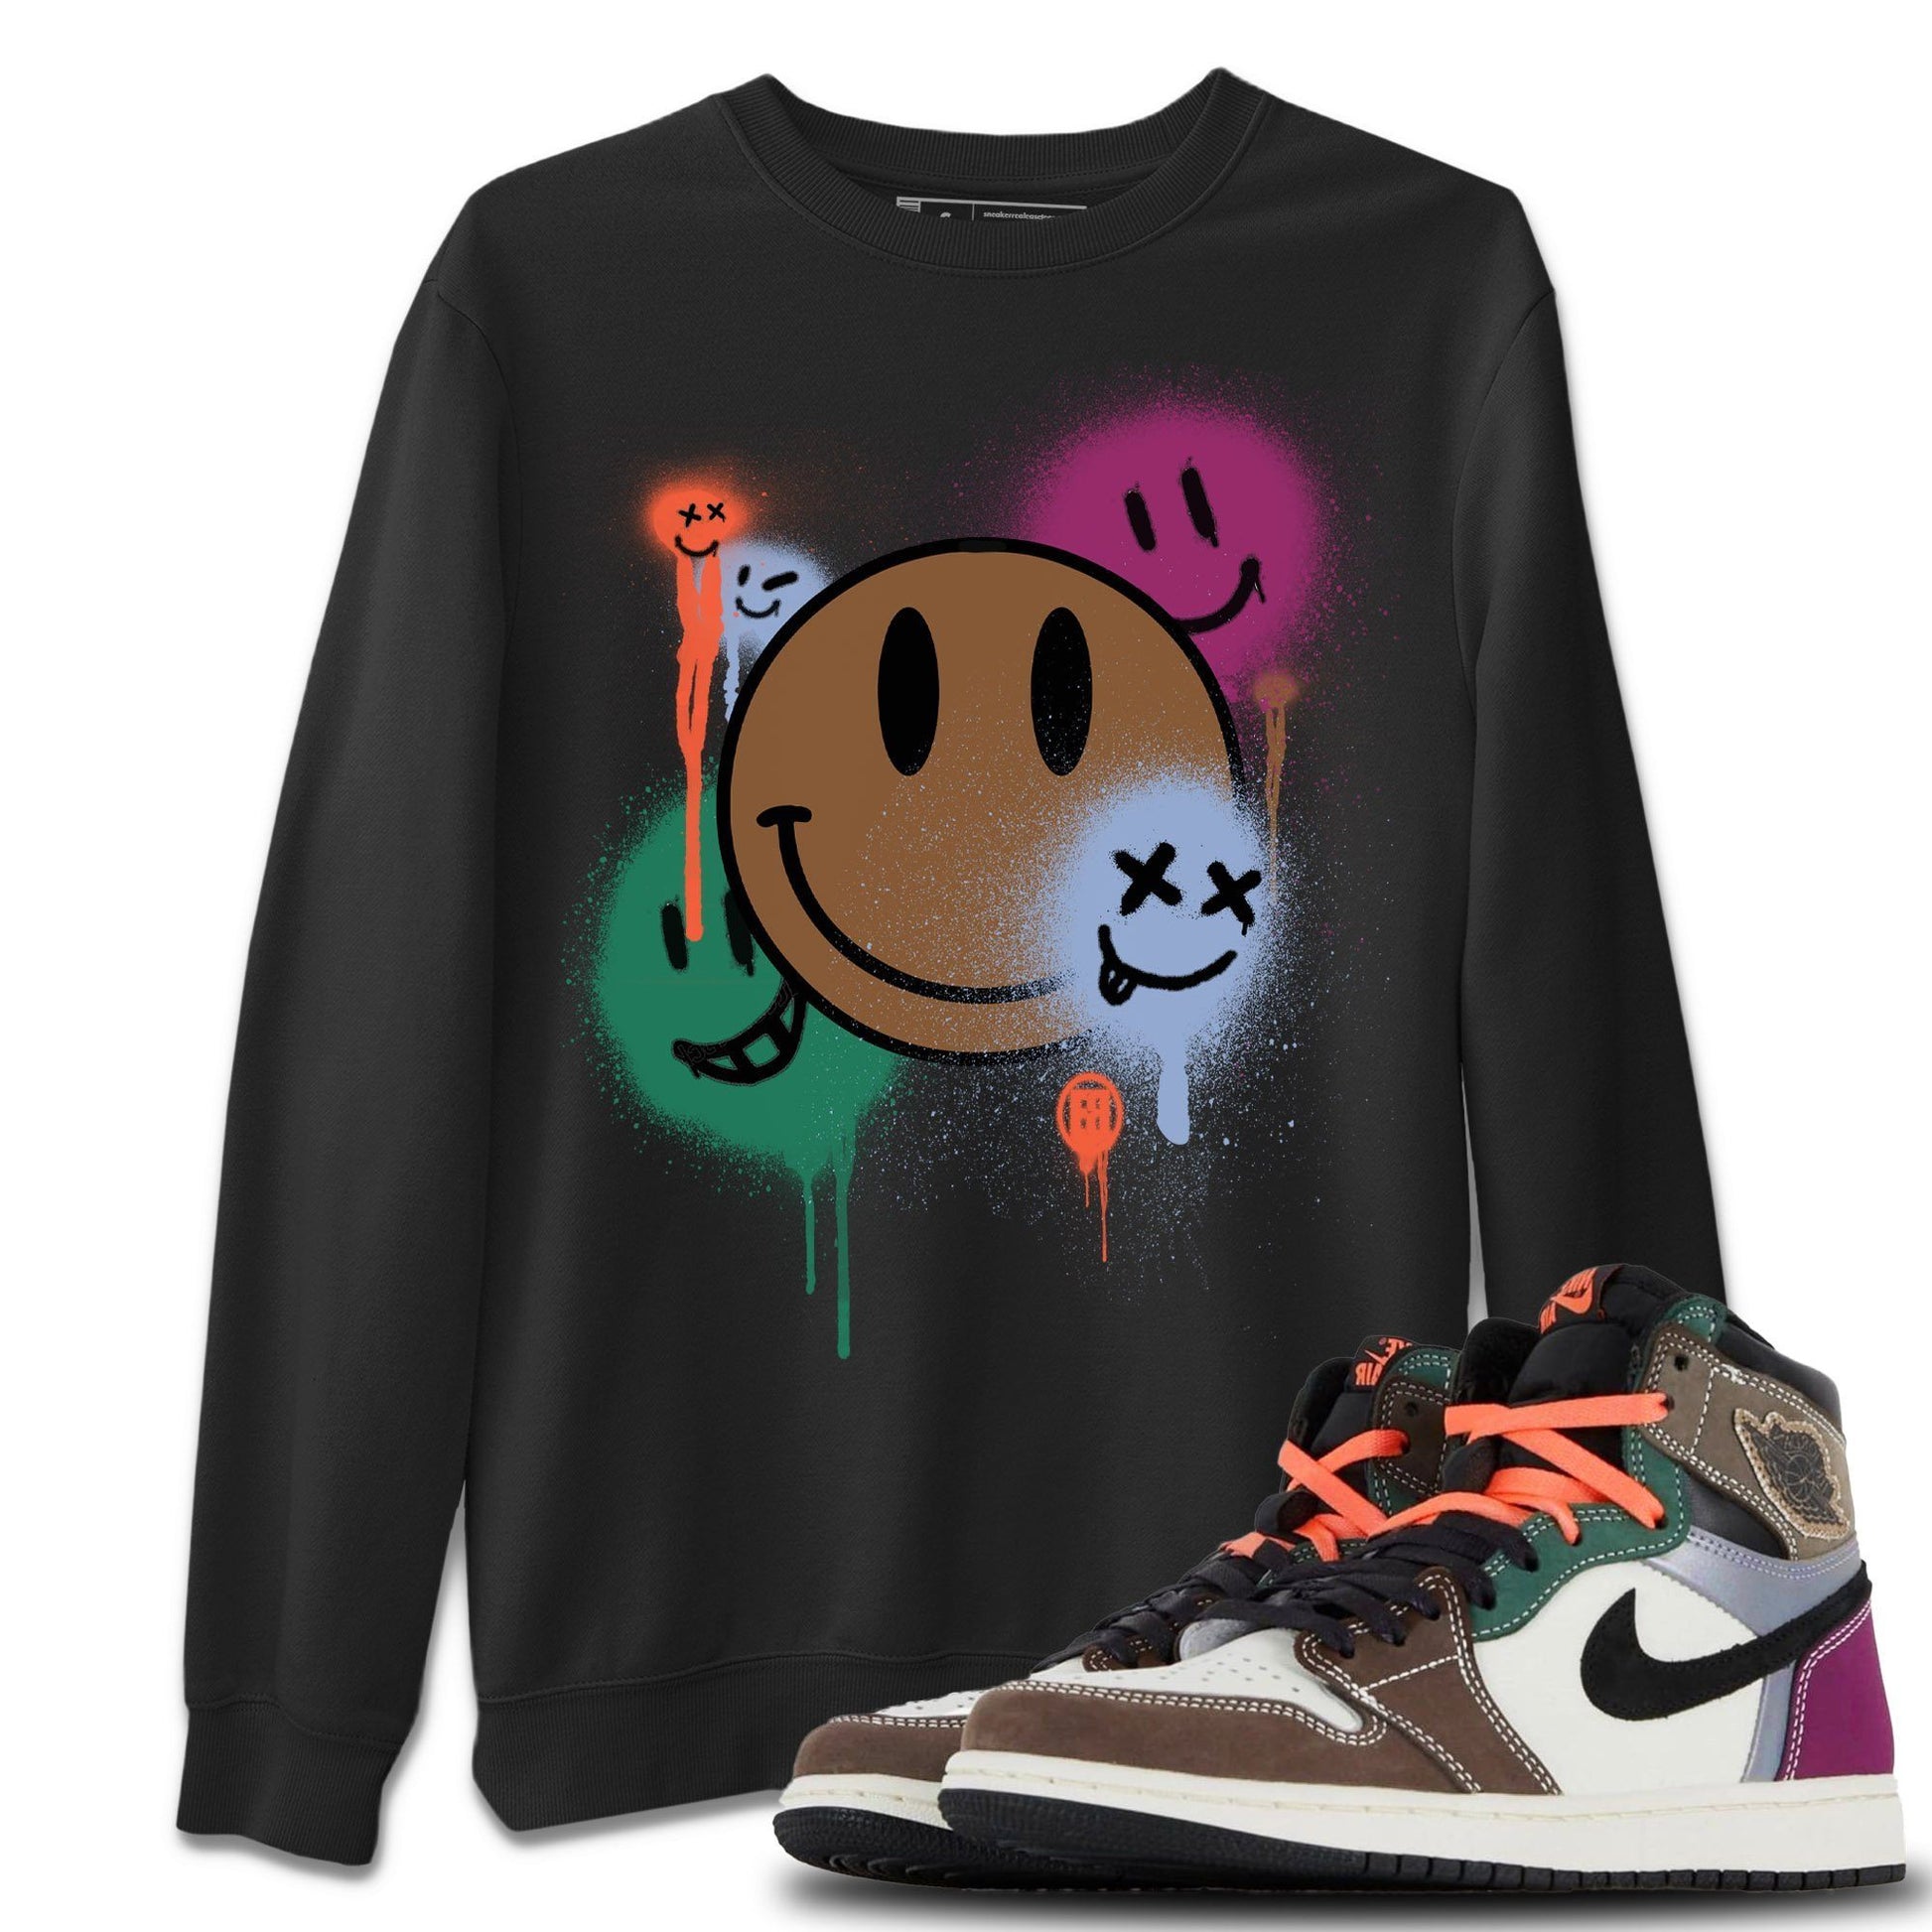 Jordan 1 Hand Crafted Sneaker Match Tees Smile Painting Sneaker Tees Jordan 1 Hand Crafted Sneaker Release Tees Unisex Shirts